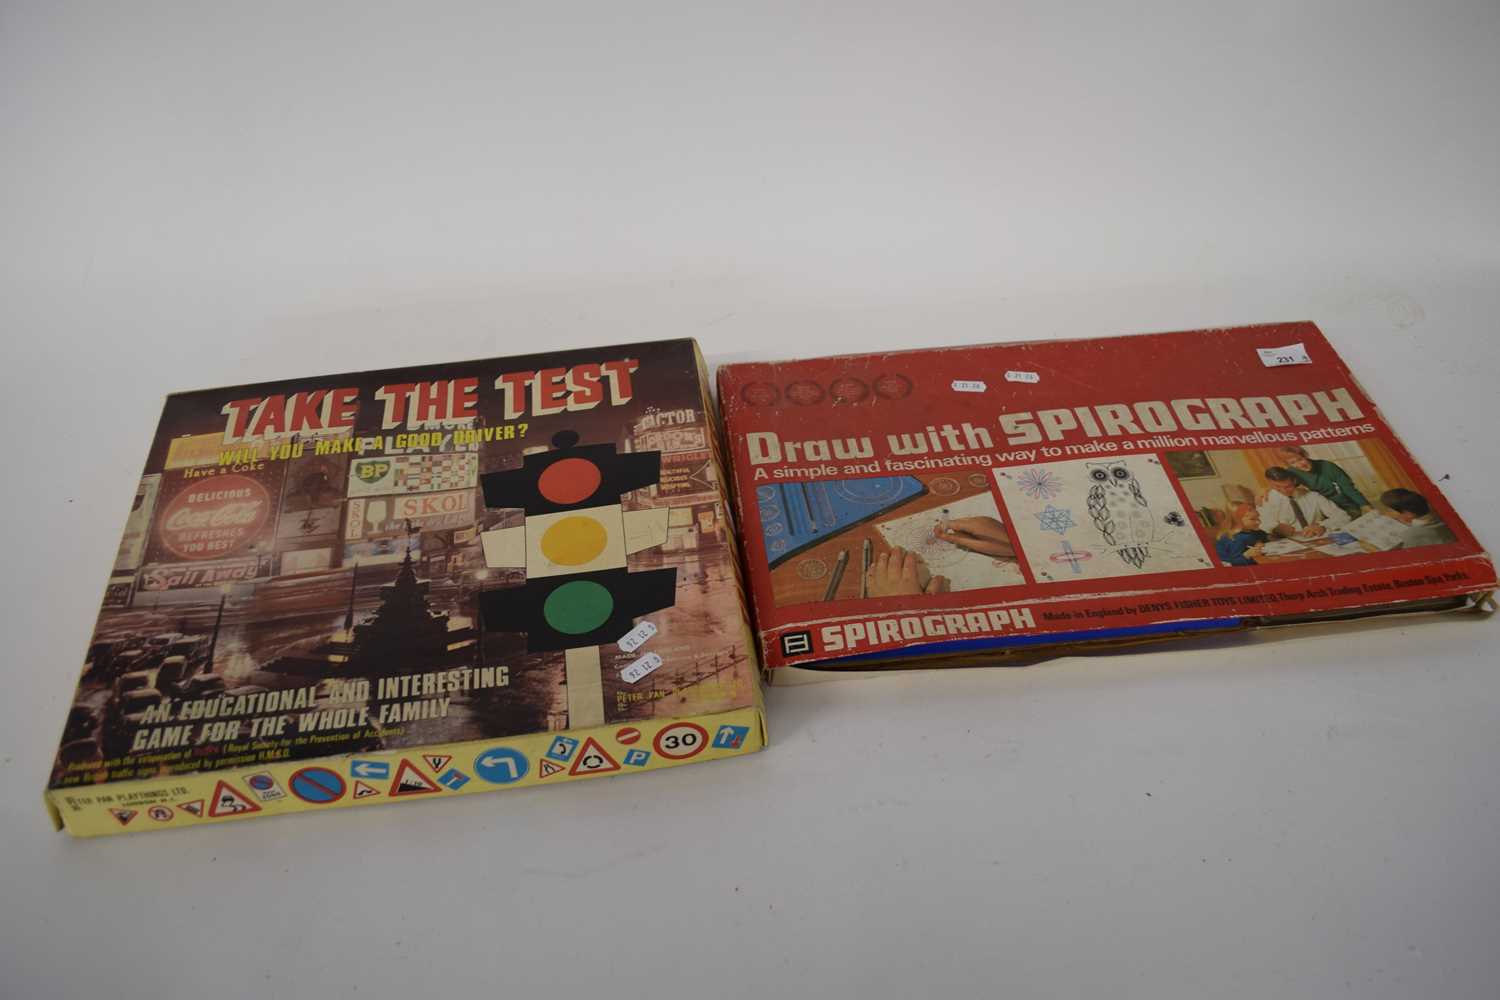 Vintate Take The Test driving game and a boxed Spirograph drawing set